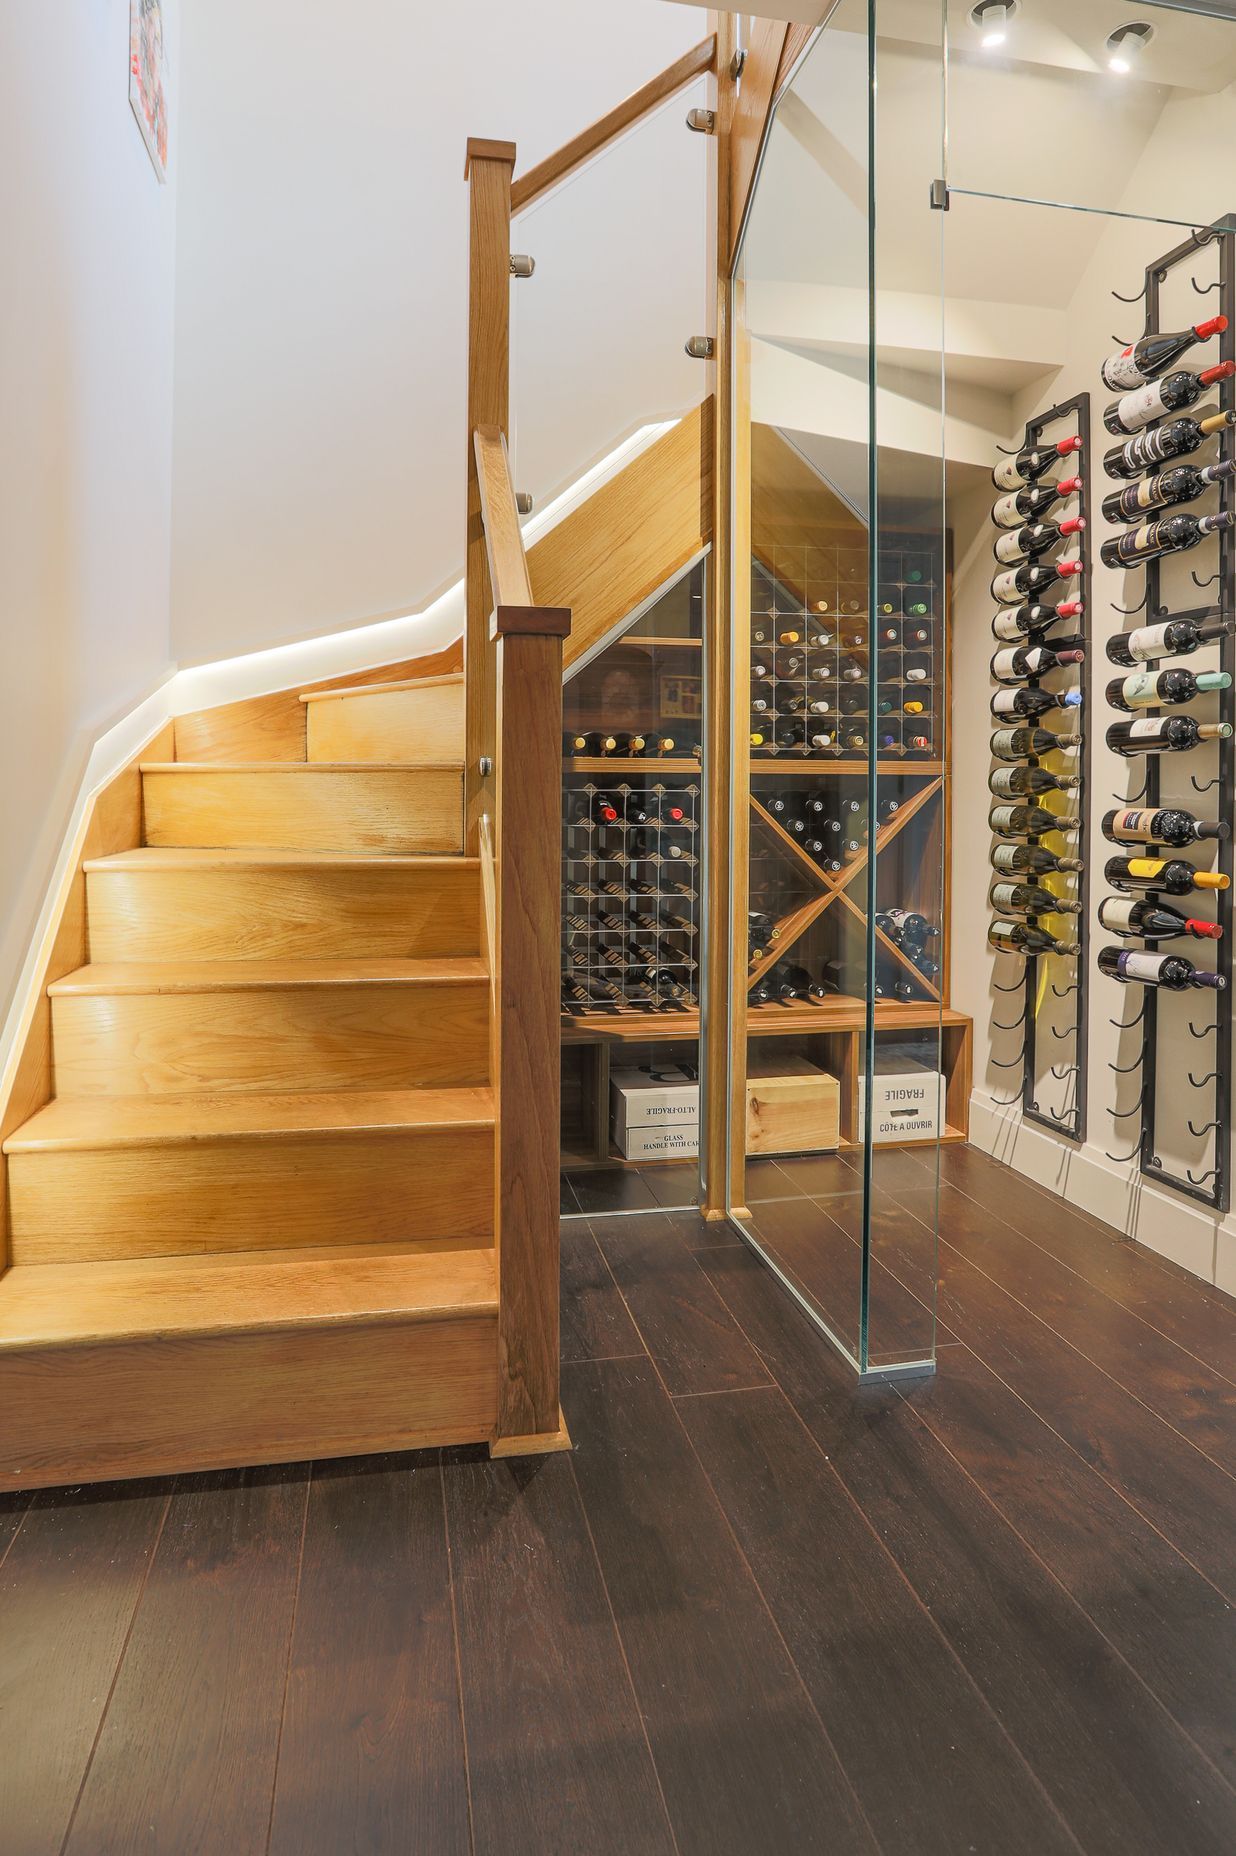 A wine cellar that caters for all tastes.